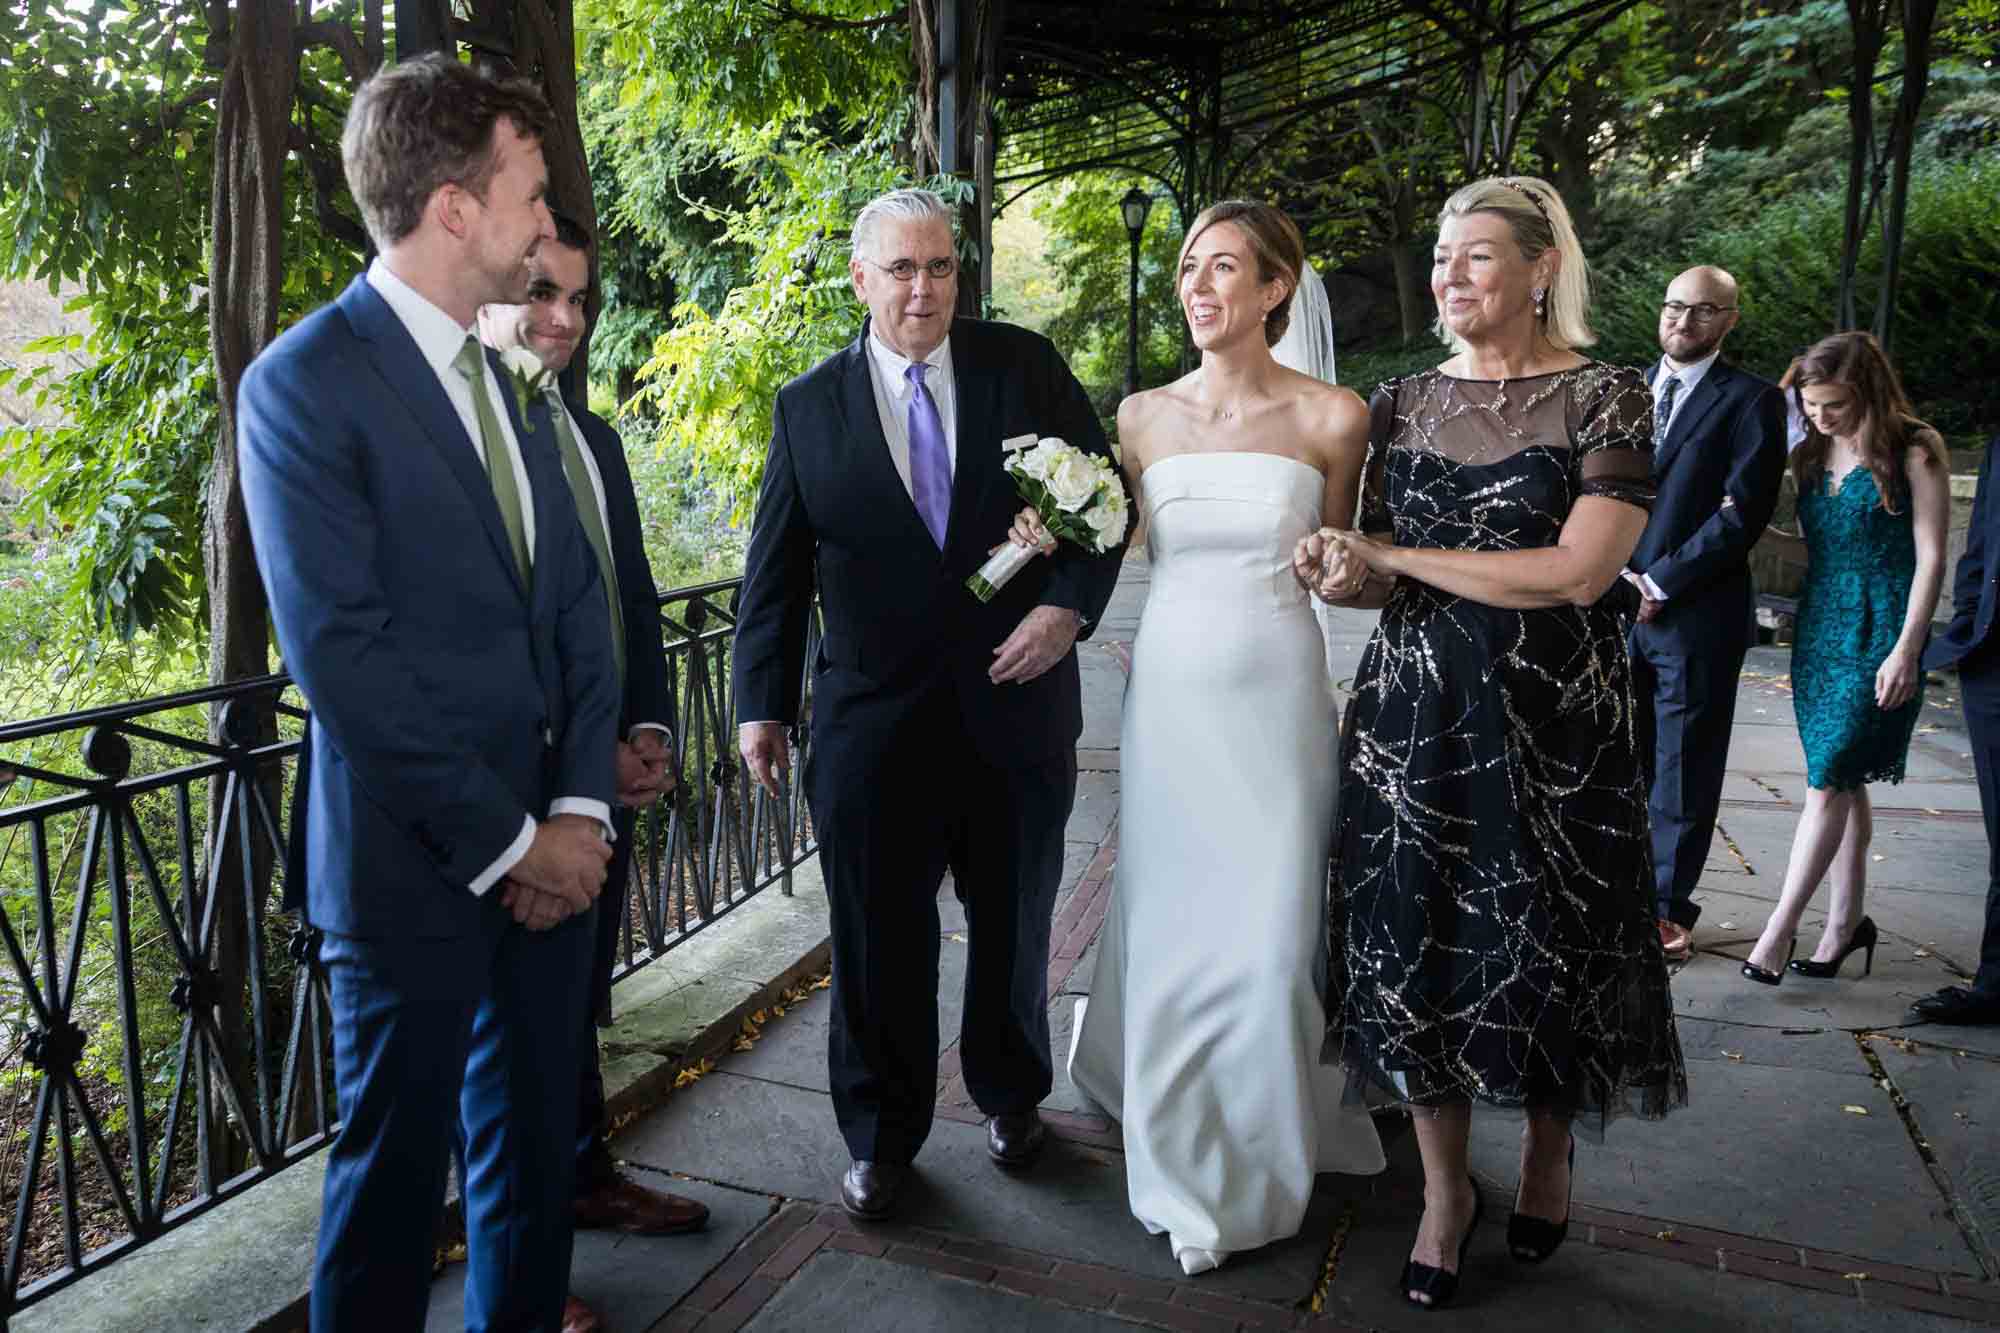 Bride and parents greeting groom on Wisteria Terrace during a Conservatory Garden wedding in Central Park